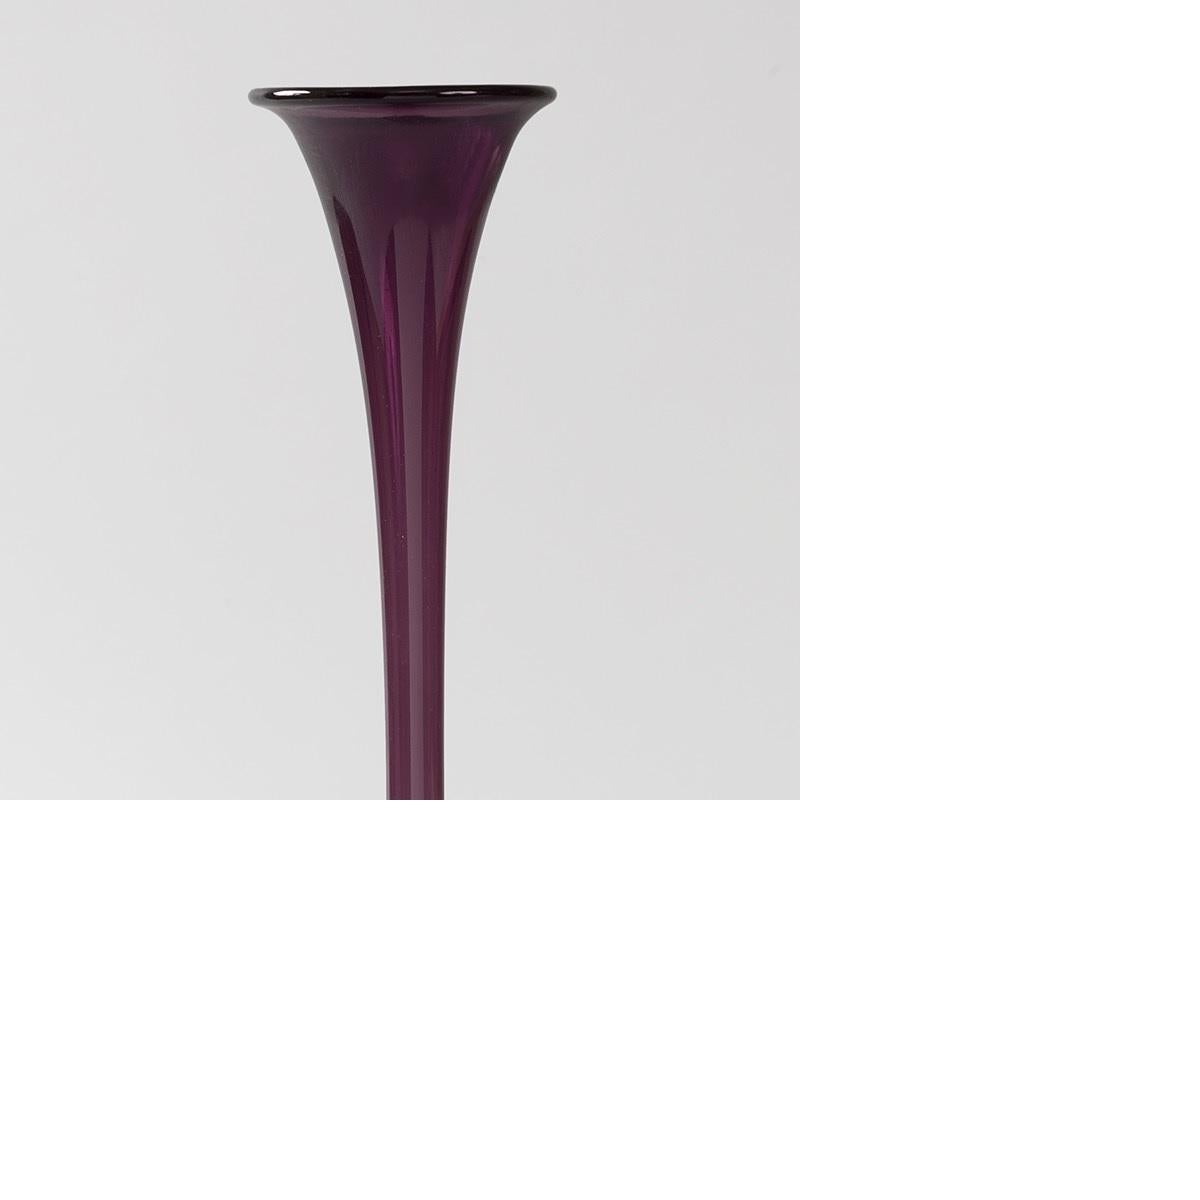 An Austrian slender and tall vase in deep purple glass by Karl Koepping.  The vase's color is reminiscent of the purple traditionally made from the spiny dye-myrex snail at great expense and associated with royalty., circa 1899. 

A similar vase is